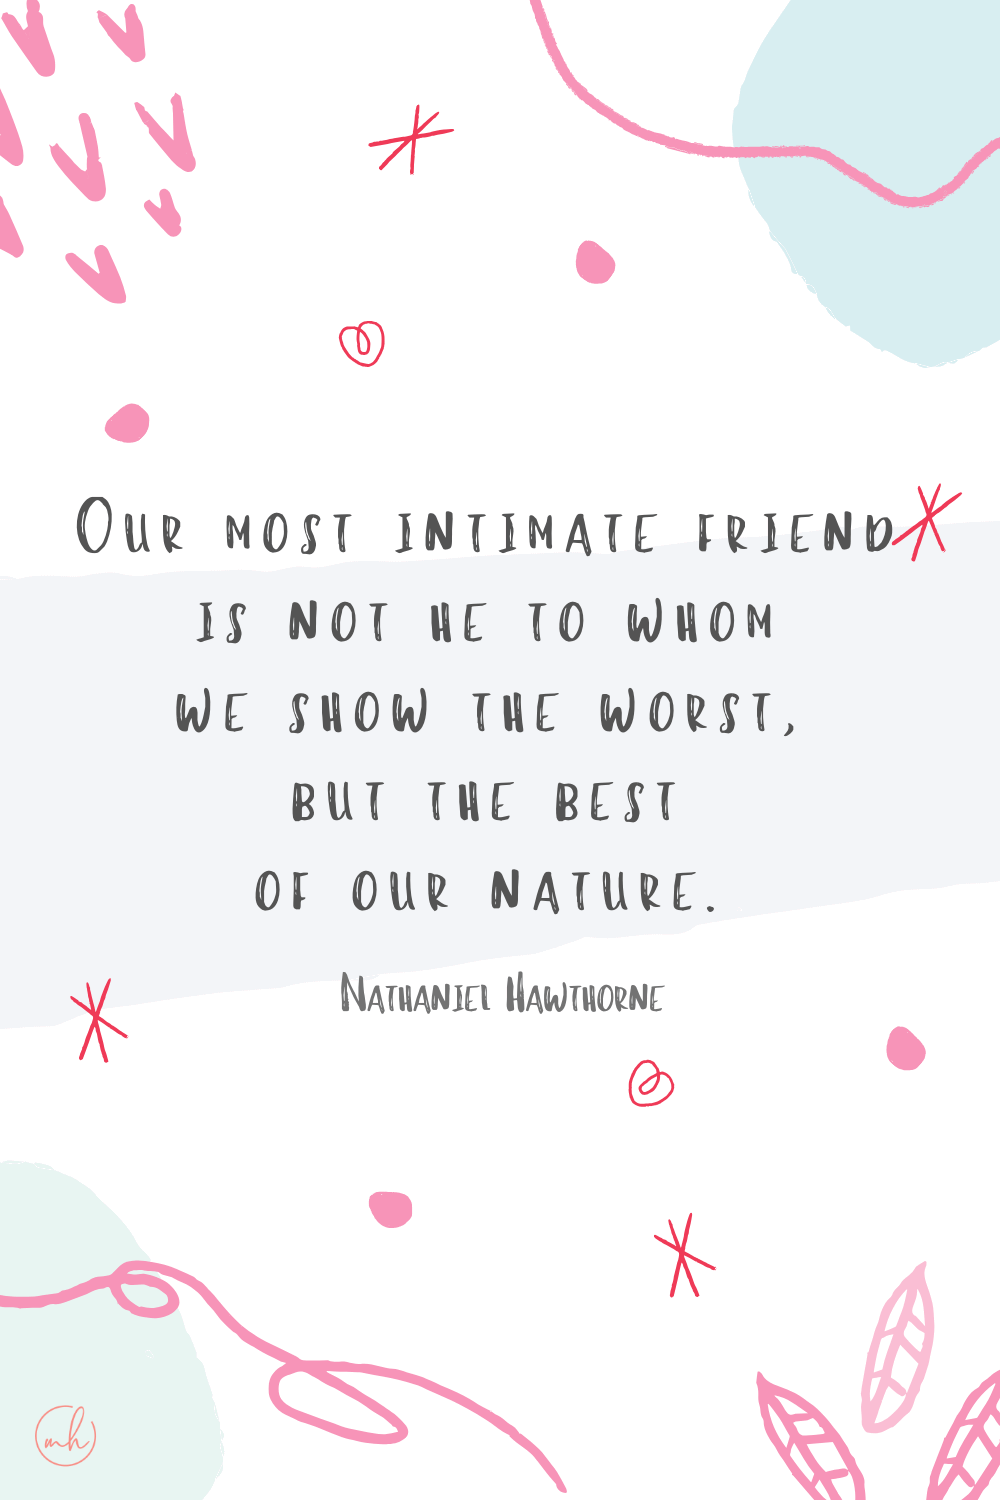 “Our most intimate friend is not he to whom we show the worst, but the best of our nature.” - Nathaniel Hawthorne